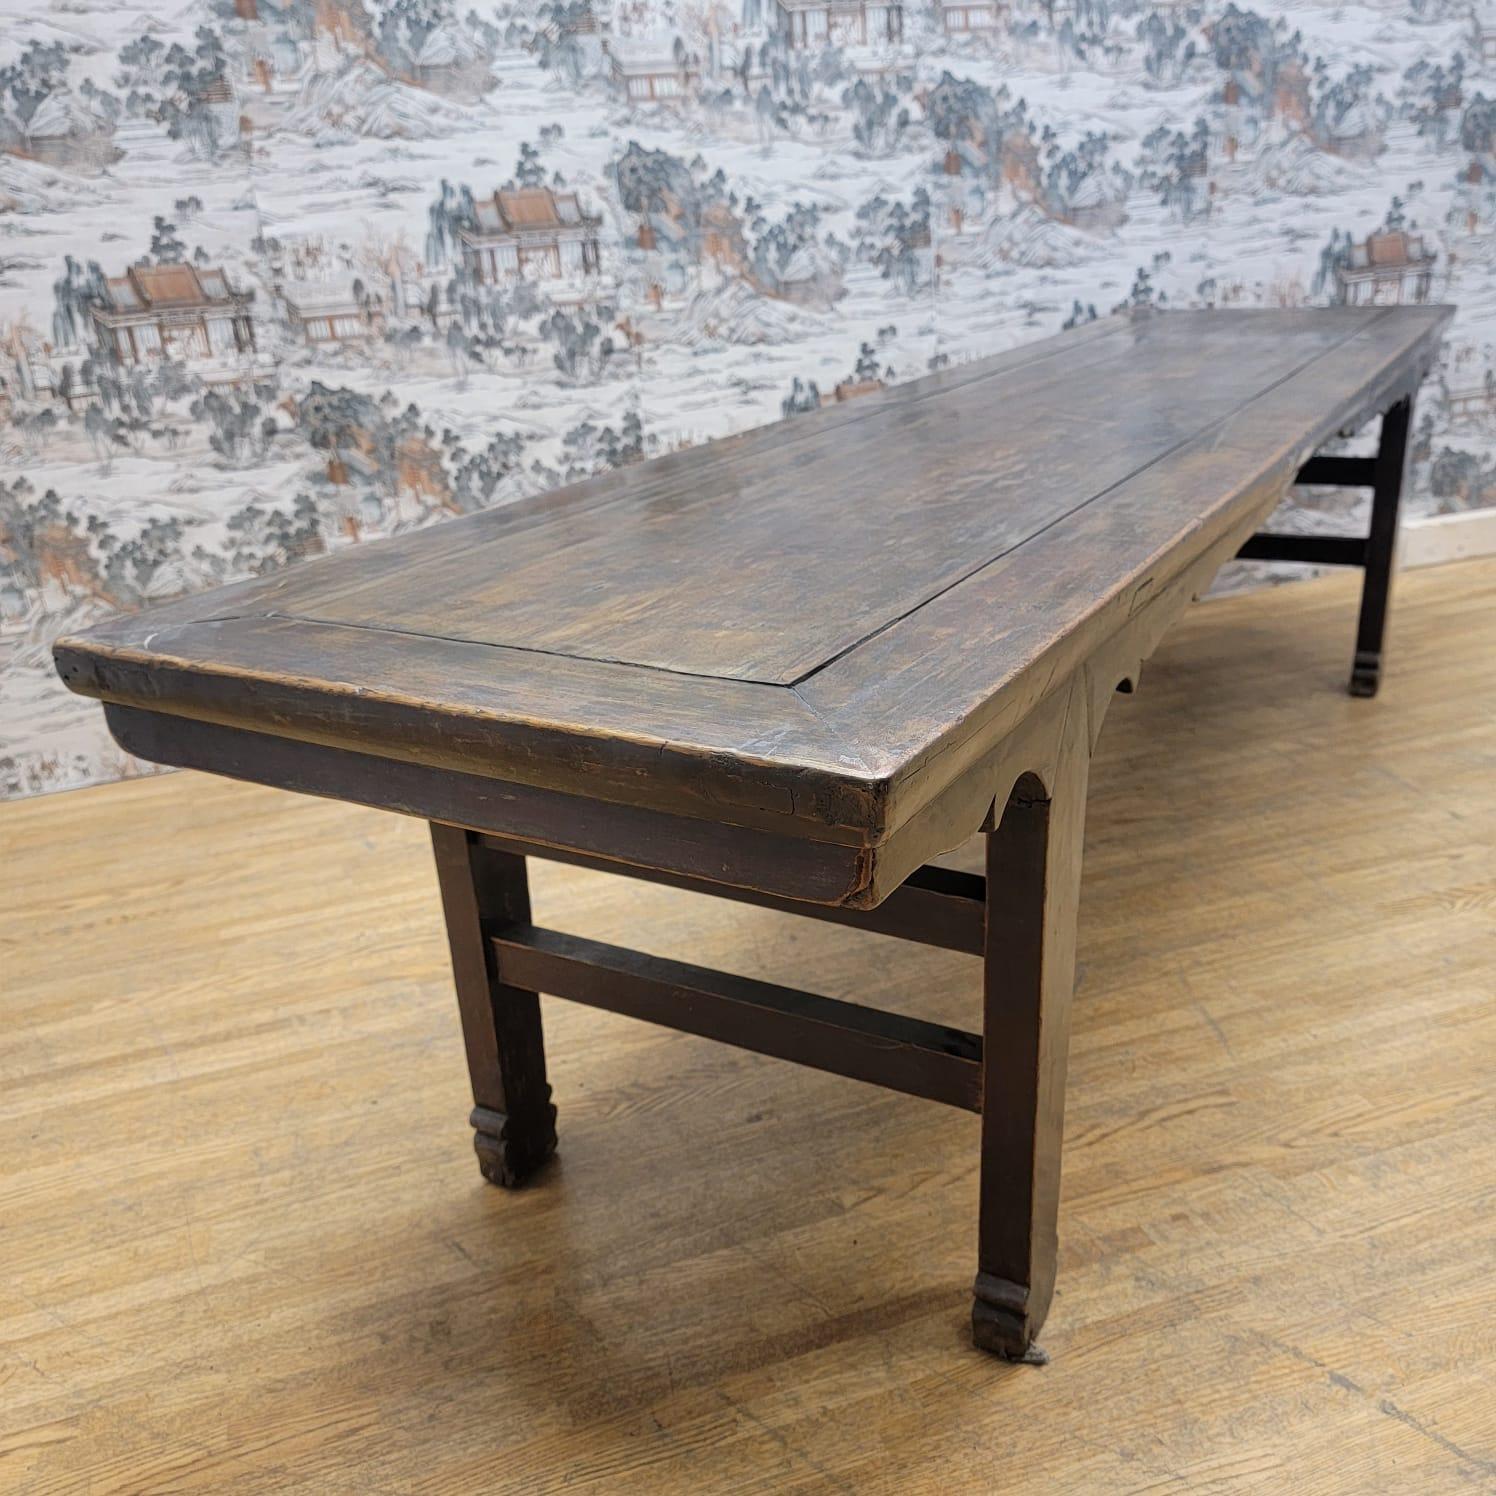 Antique Shanxi Province Elm Calligraphy table

This antique lm wood calligraphy table with original color and patina is from the Shanxi Province of China. It’s a rarity to find these long tables intact and uncut and modified. This elegant table